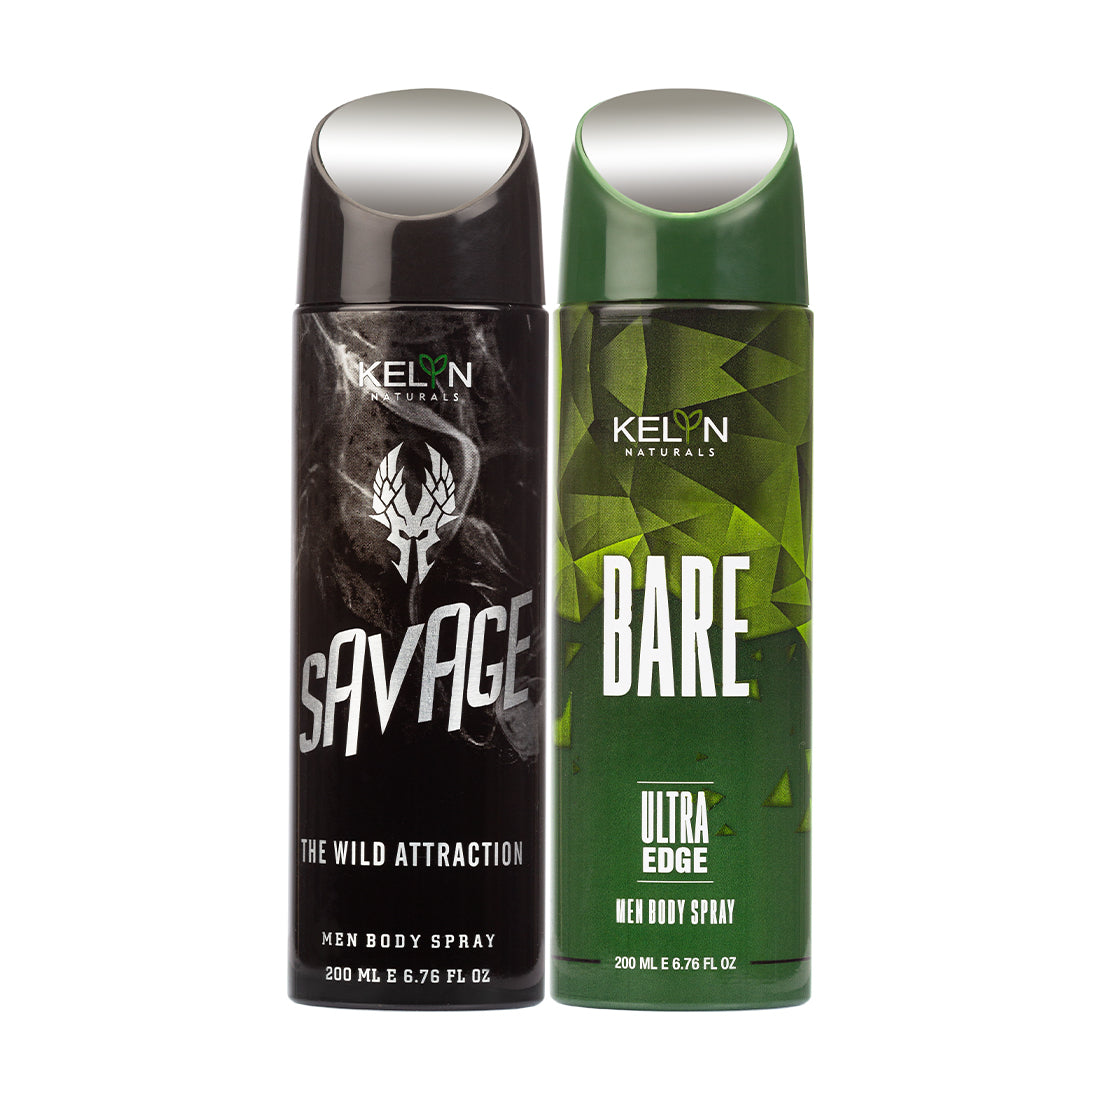 Savage, Bare Deodorant for Men Body Spray (Pack of 2) 200 ml each